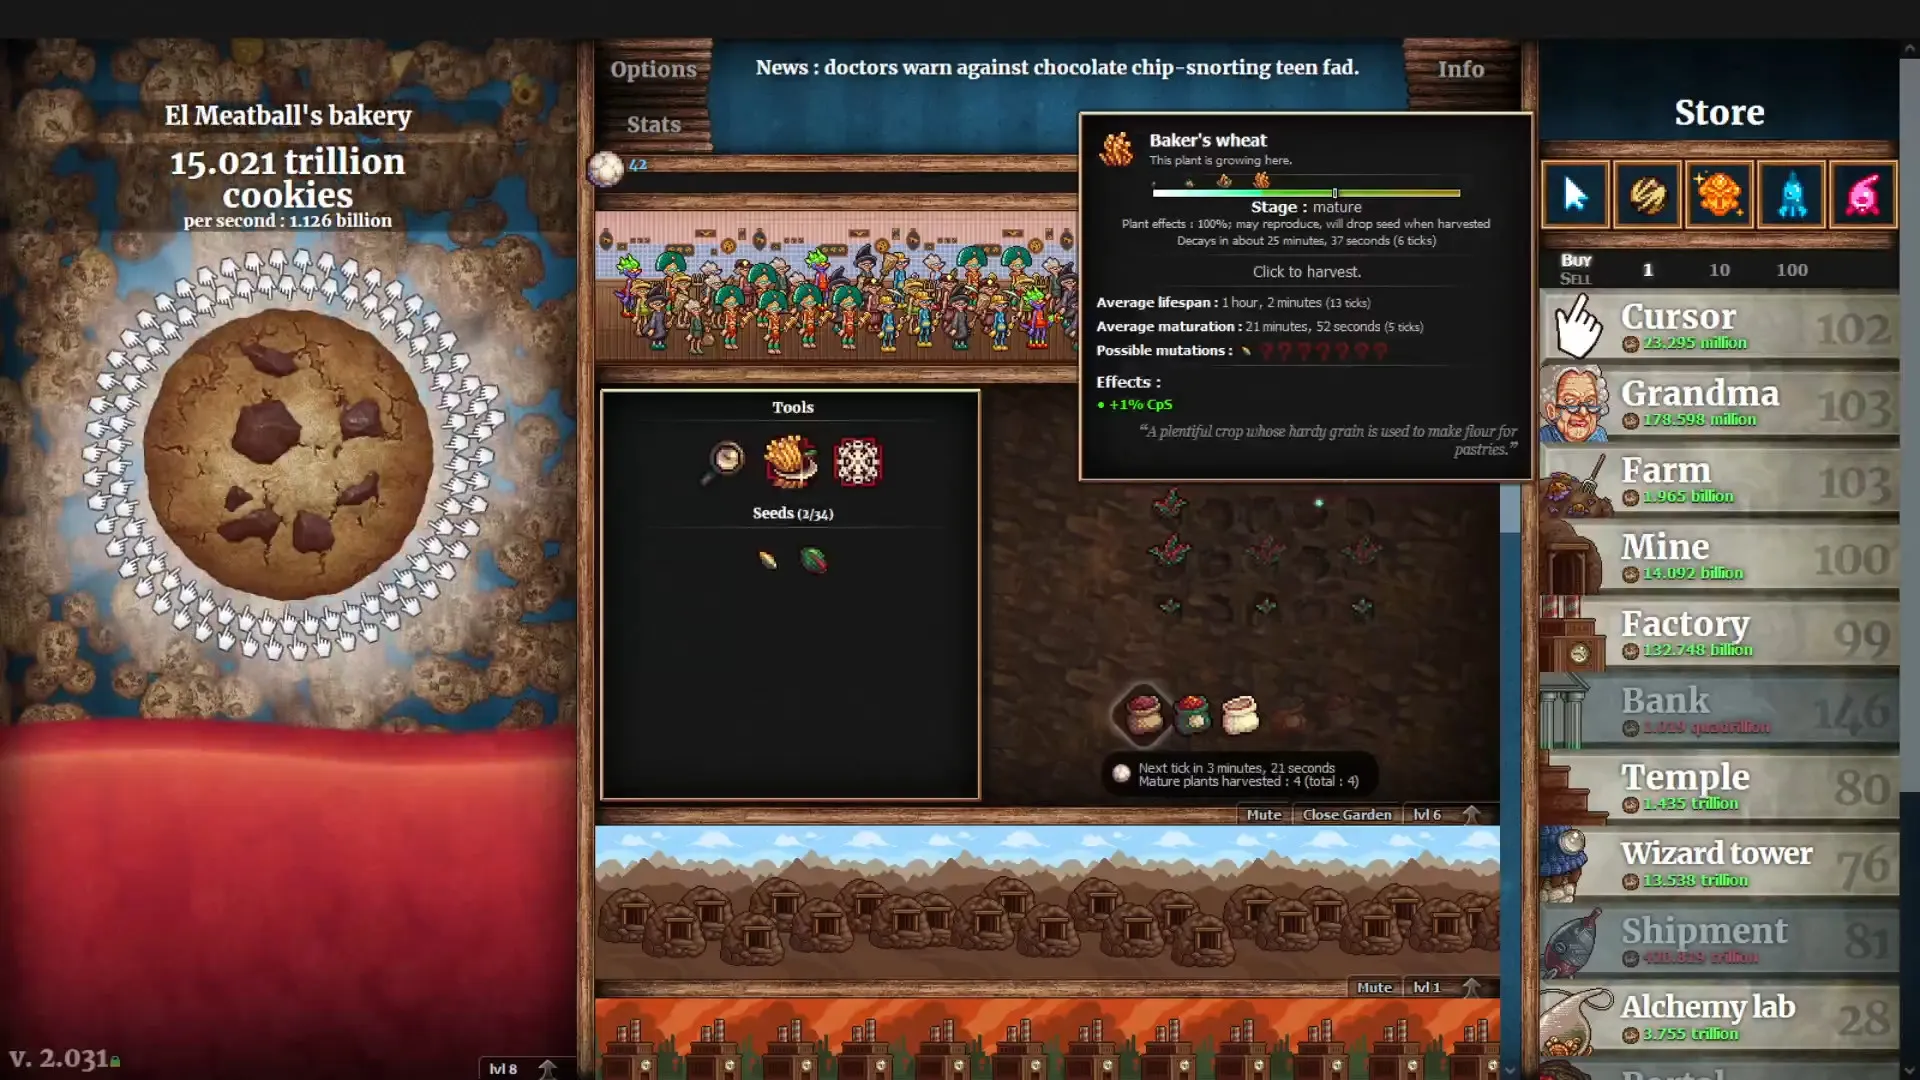 Cookie Clicker Steam Version Teases C418 Soundtrack, 600+ Upgrades